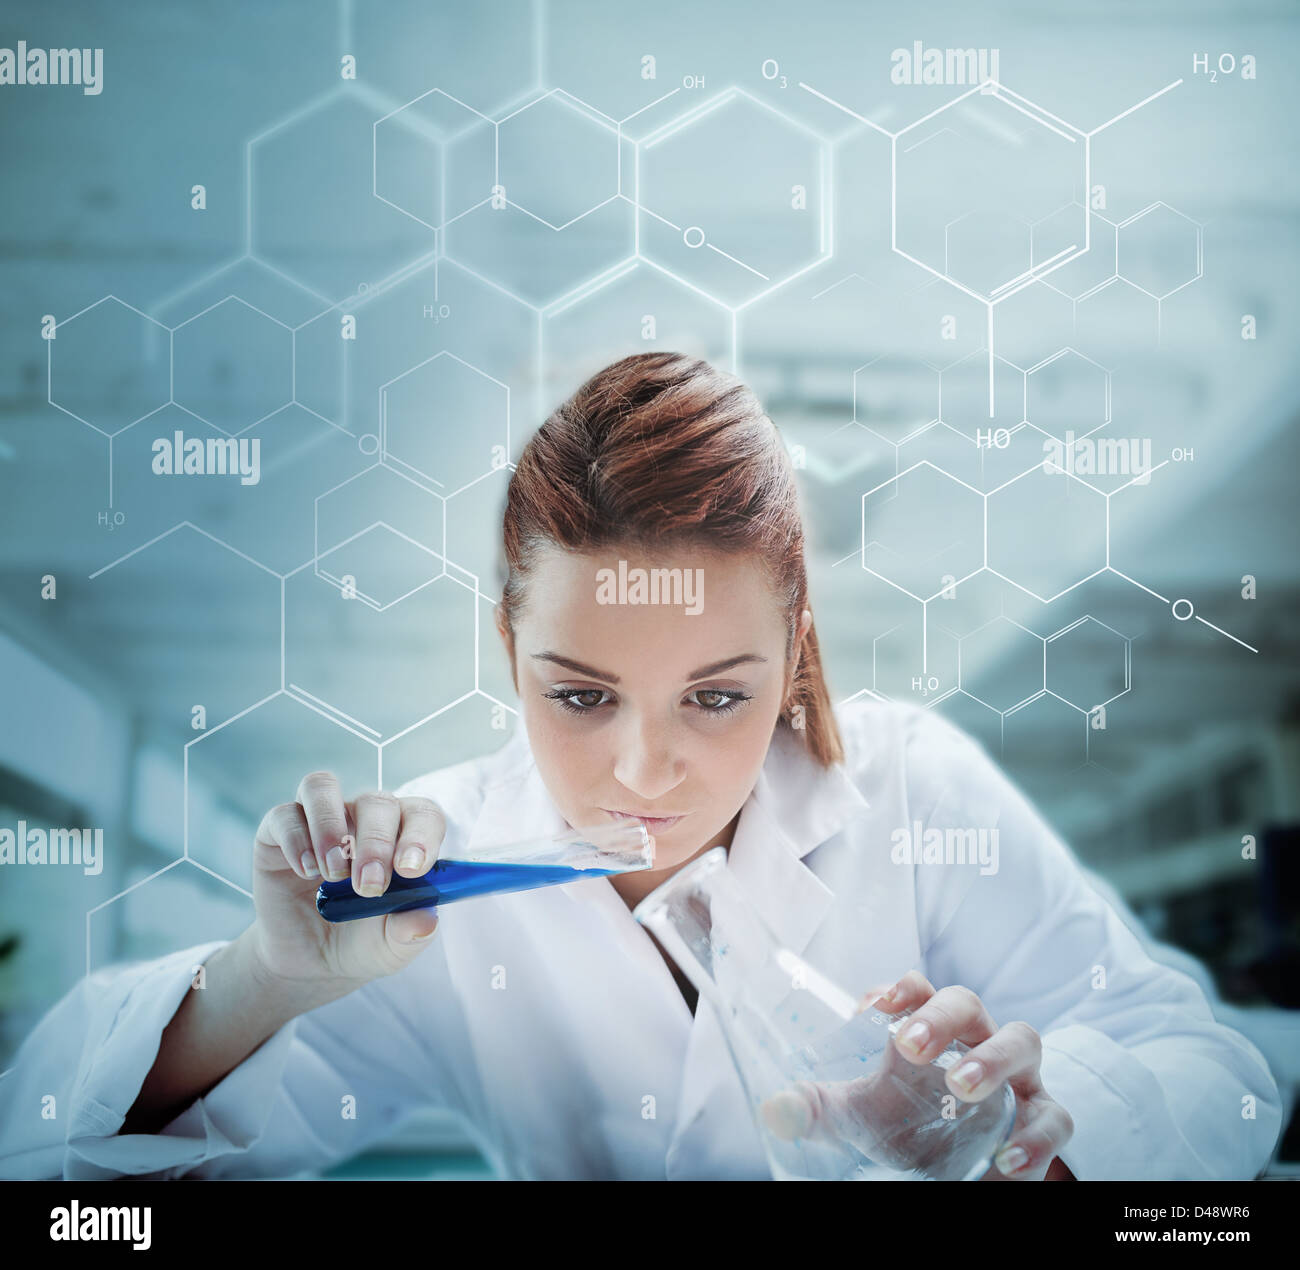 Scientist pouring liquid into erlenmeyer with futuristic screen showing formula Stock Photo